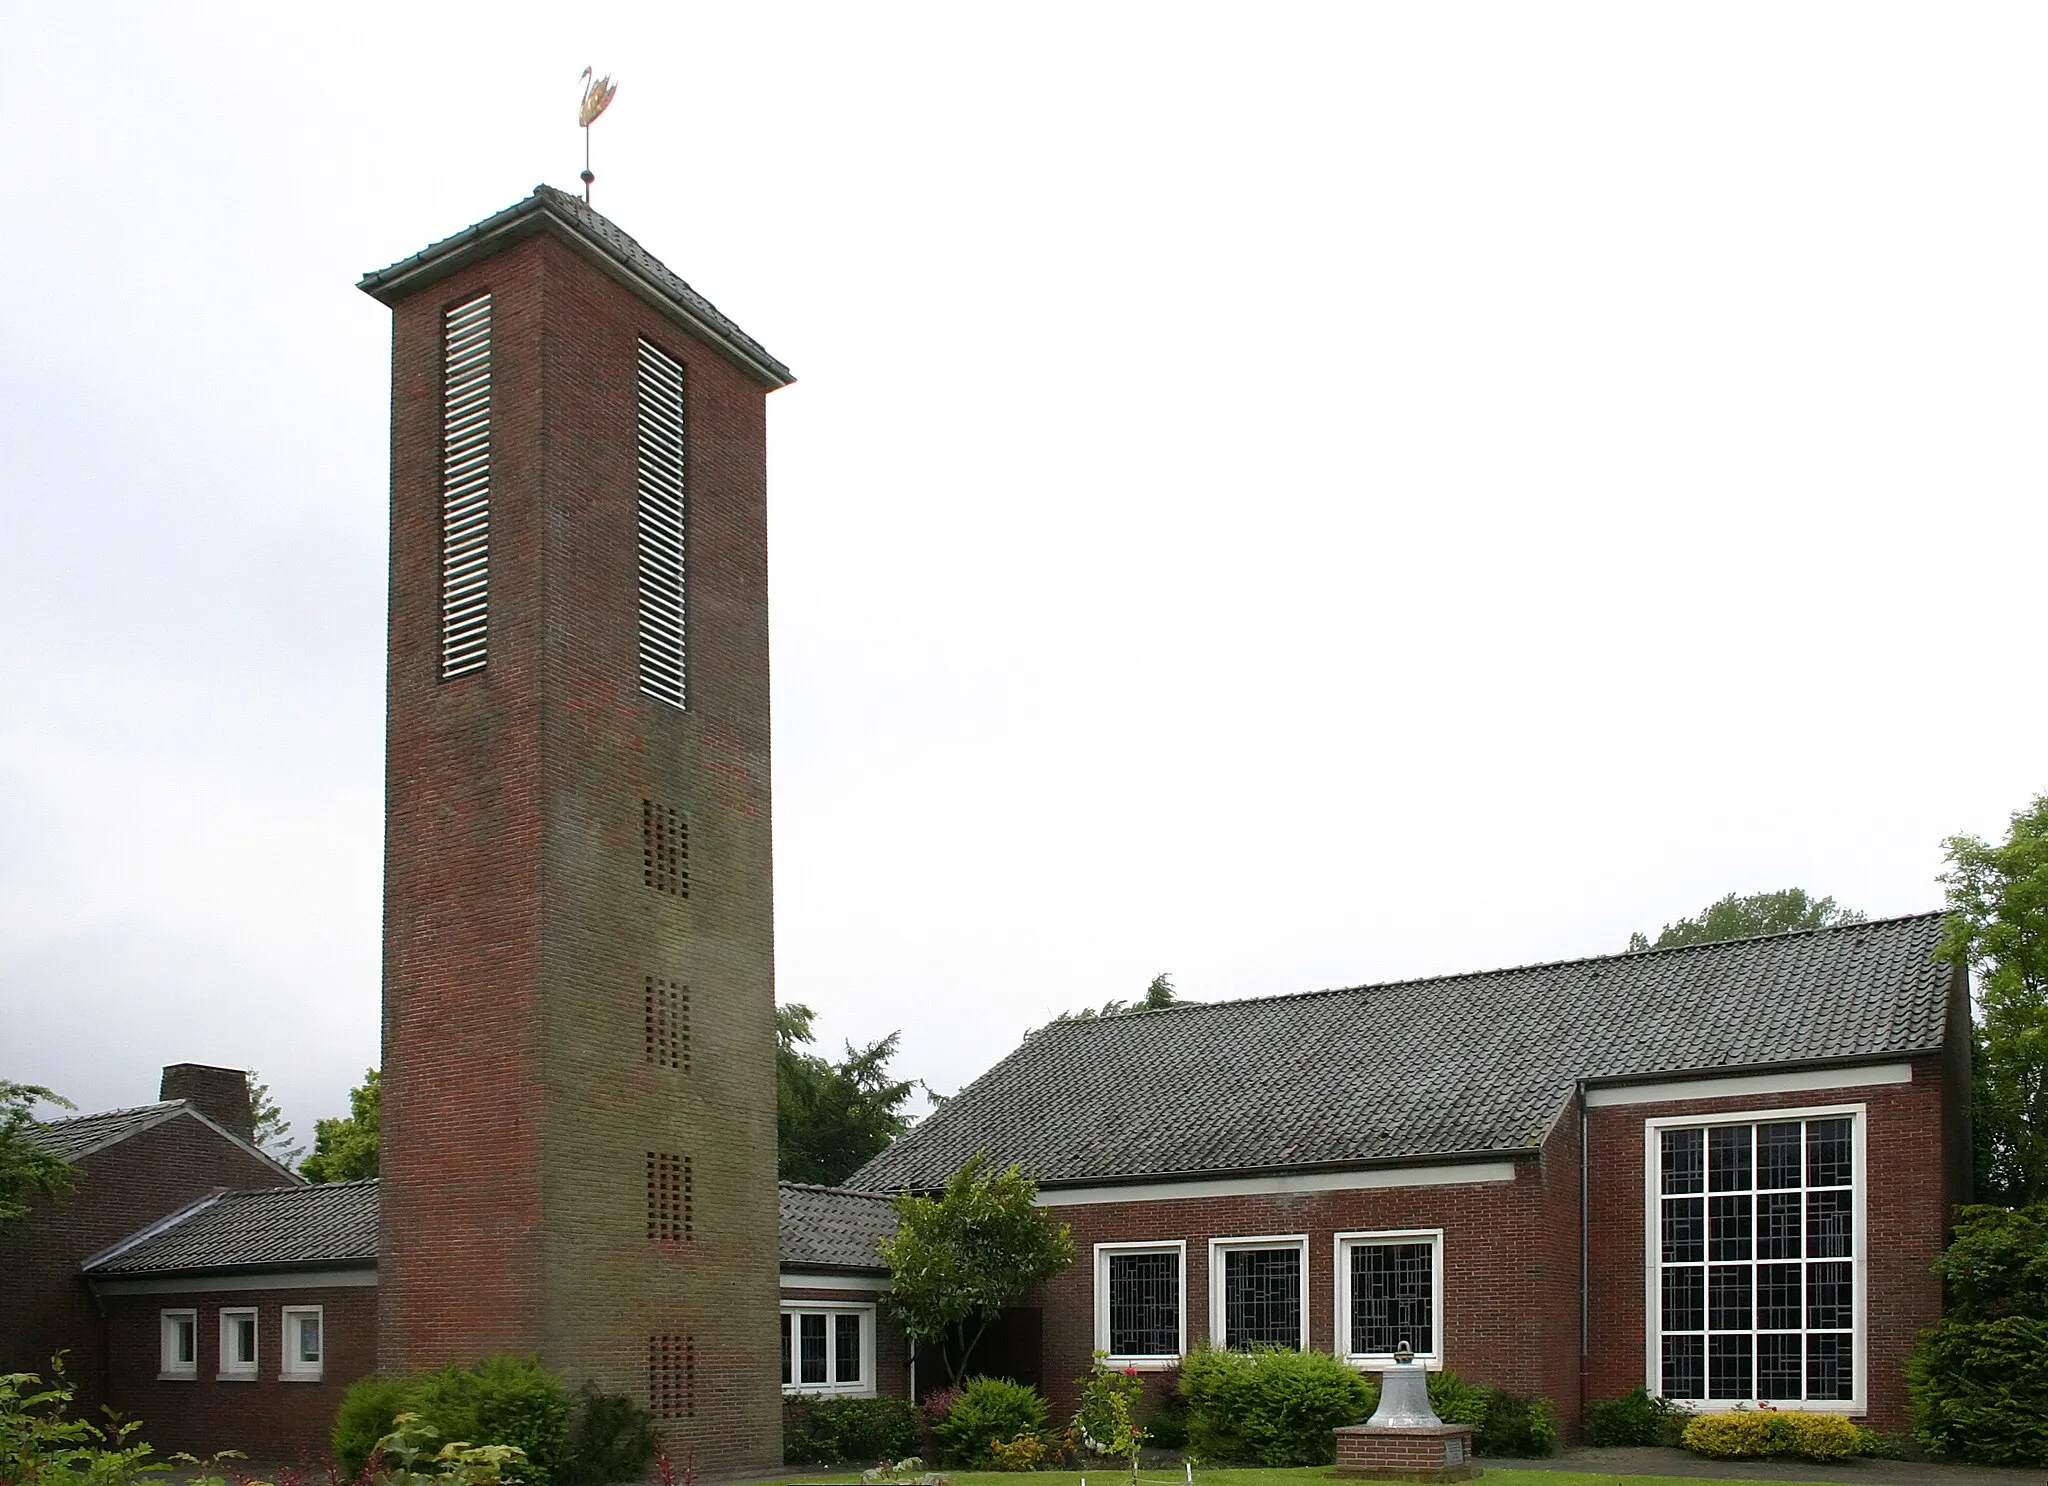 Photo showing: Historical Grace Church in Tidofeld (a locality of Norden), district of Aurich, East Frisia, Germany. Now a document centre on the history of expulsion, expellees and refugees from the former eastern territories of Germany.